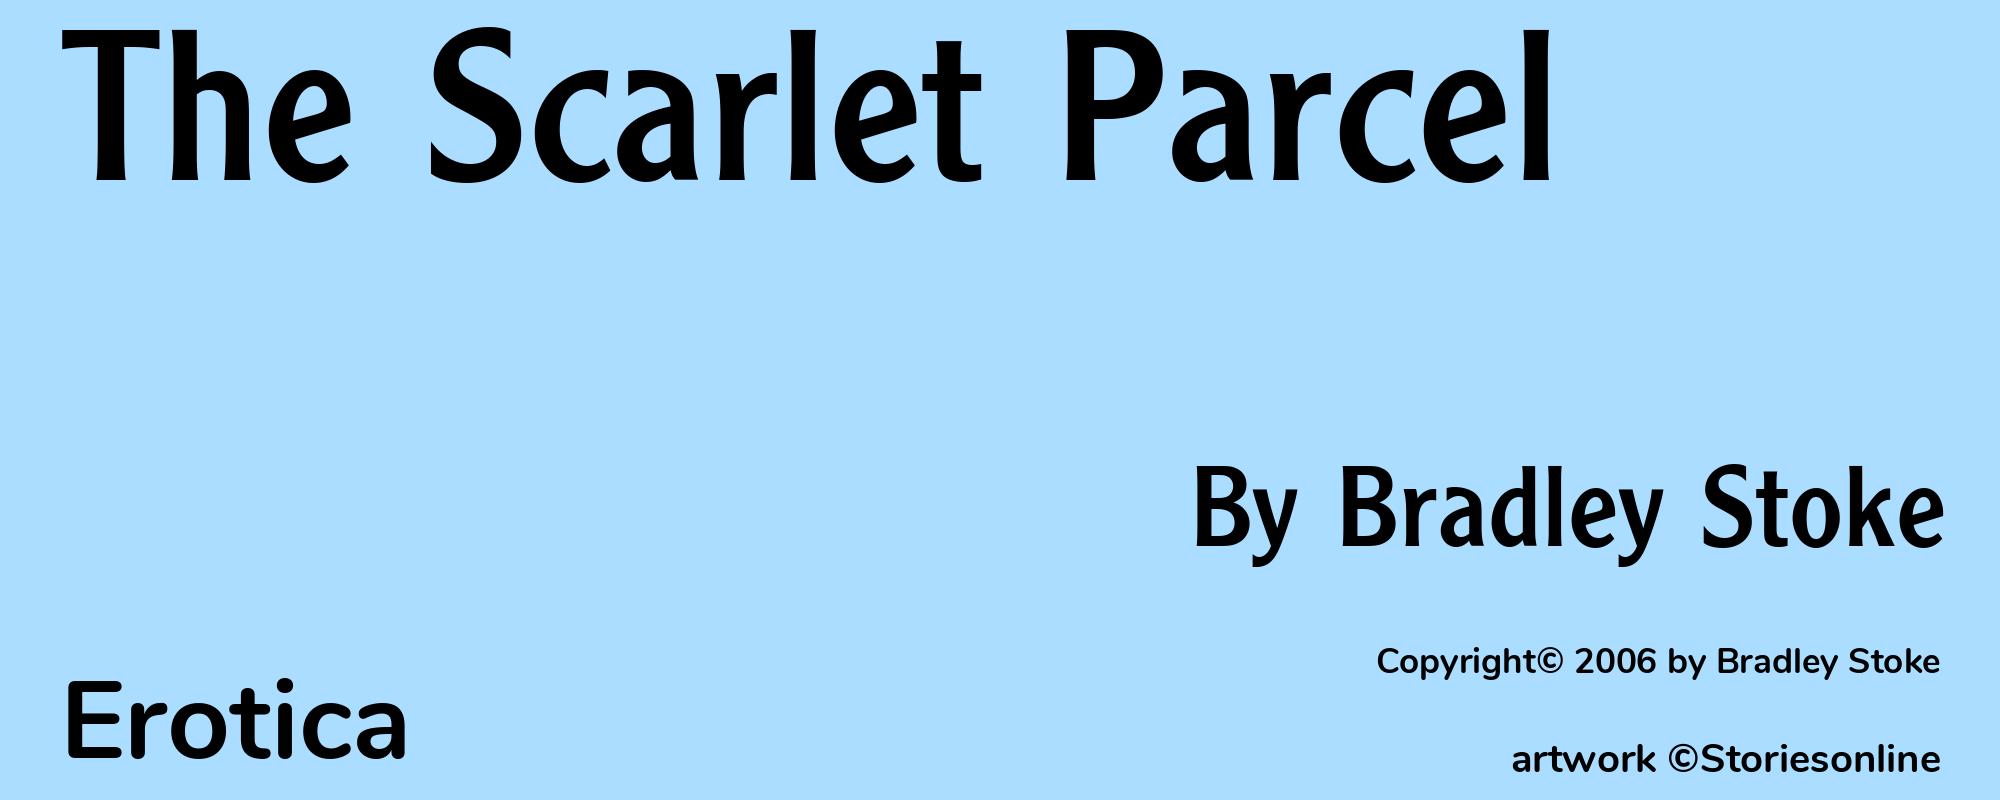 The Scarlet Parcel - Cover